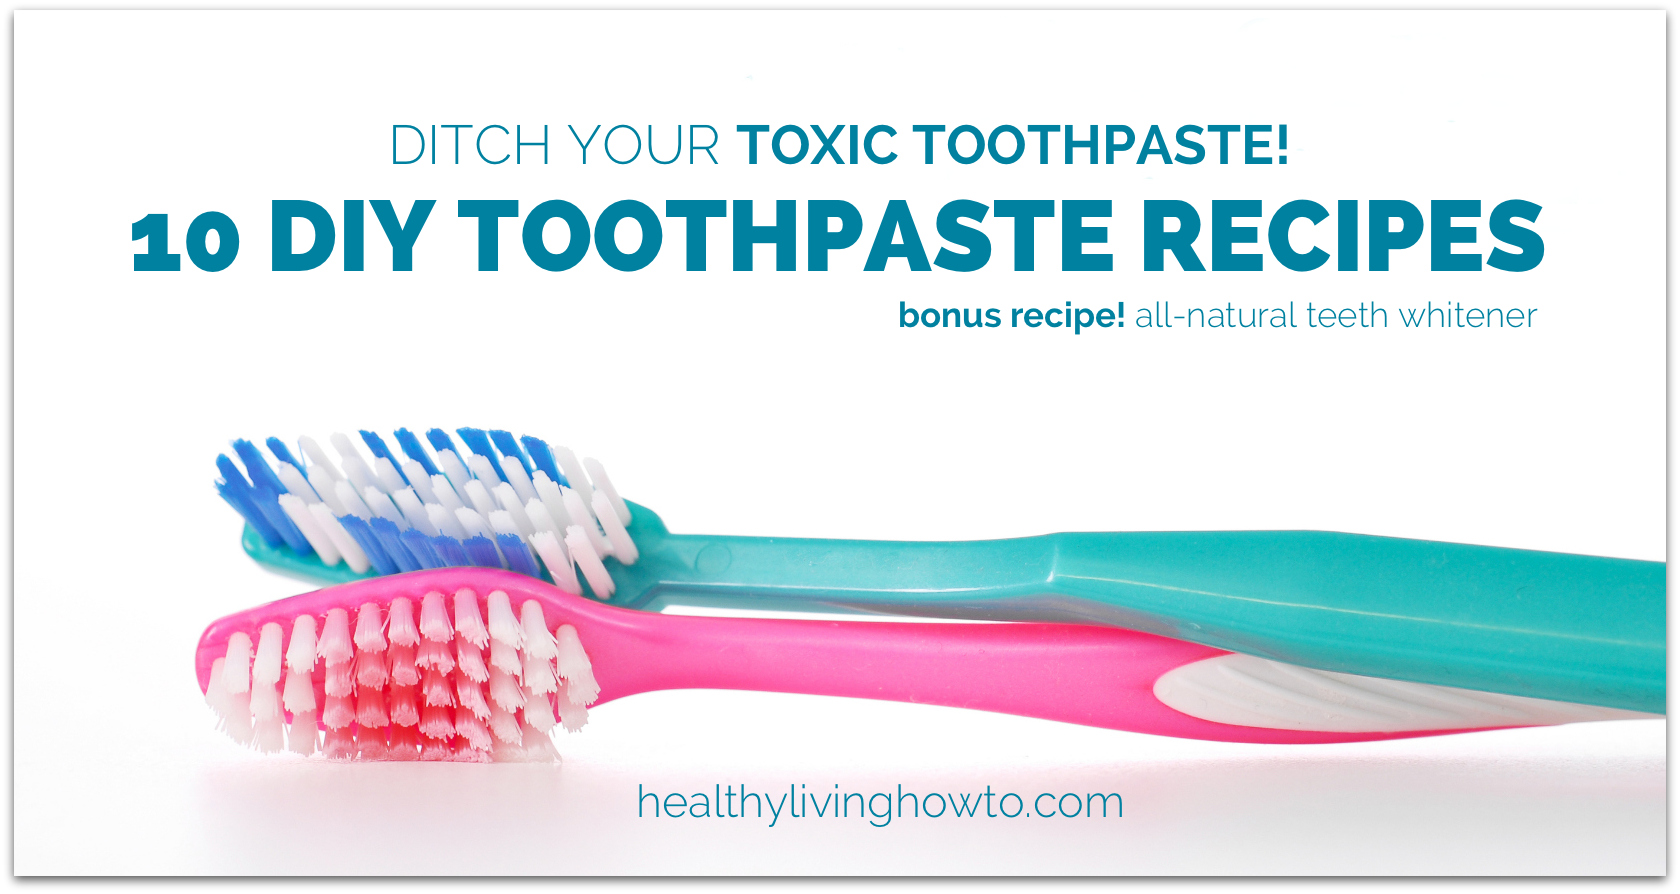 Ditch Your Toxic Toothpaste! 10 DIY Toothpaste Recipes healthylivinghowto.com